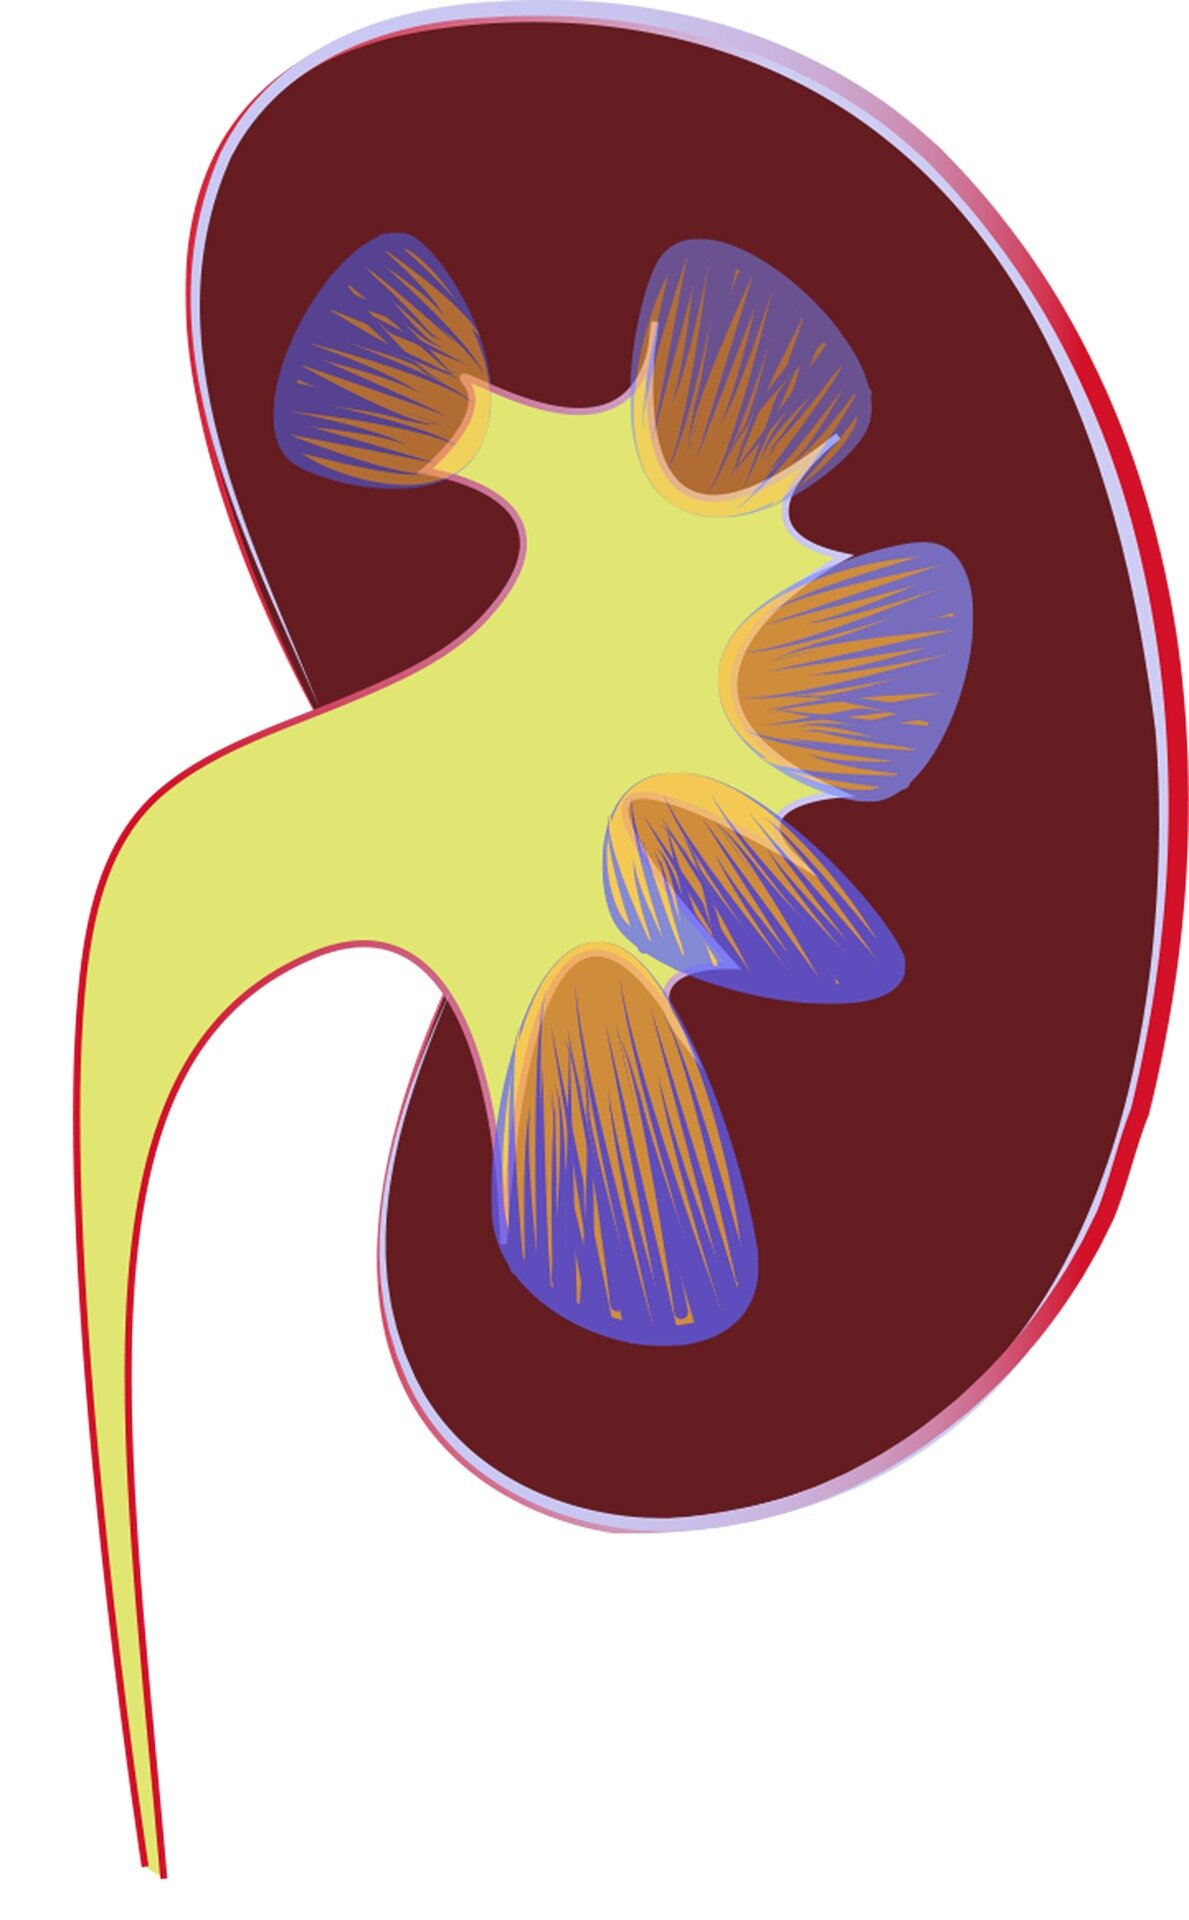 #Study examines the effects of COVID-19 on human kidney cells